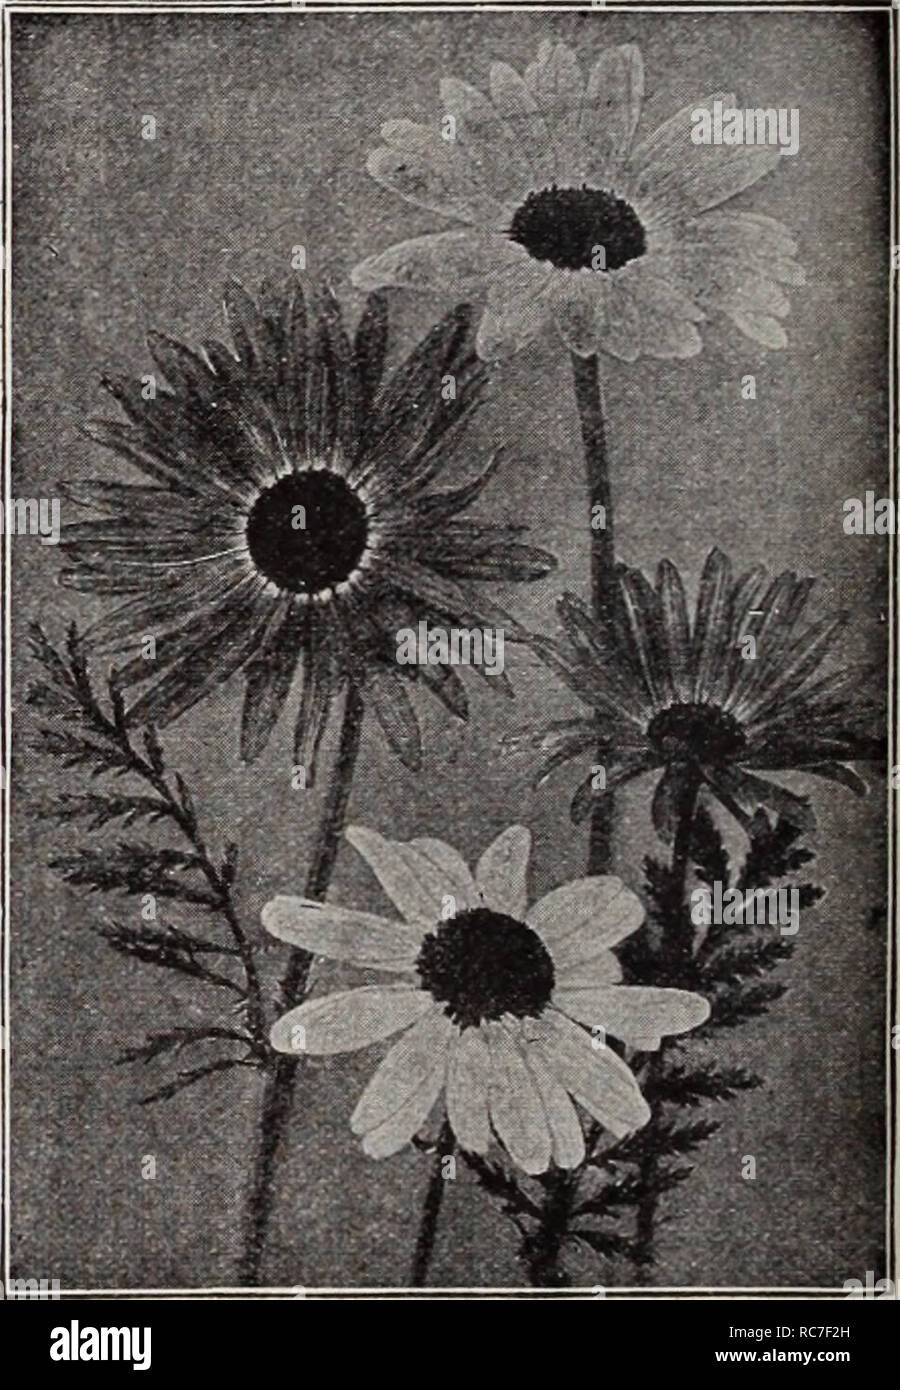 . Dreer's garden book / Henry A. Dreer.. Nursery Catalogue. Romneya Coulter: Rosmarinus (Rosemary) Officinalis. An old favorite aromatic herb of neat habit of growth; requires protection. 2 feet. 25 cts. each; $2.50 per doz. Rudbeckia (Cone-flower) Indispensable plants for the hardy border, grow and thrive anywhere, giving a wealth of bloom, well suited for cutting. Golden Globe. An improved globular form of the popular Golden Glow with large double golden yellow flowers, not unlike a Pompon Dahlia. 5 feet; July to September. Maxima. An attractive variety, growing 5 feet high, with large glauc Stock Photo